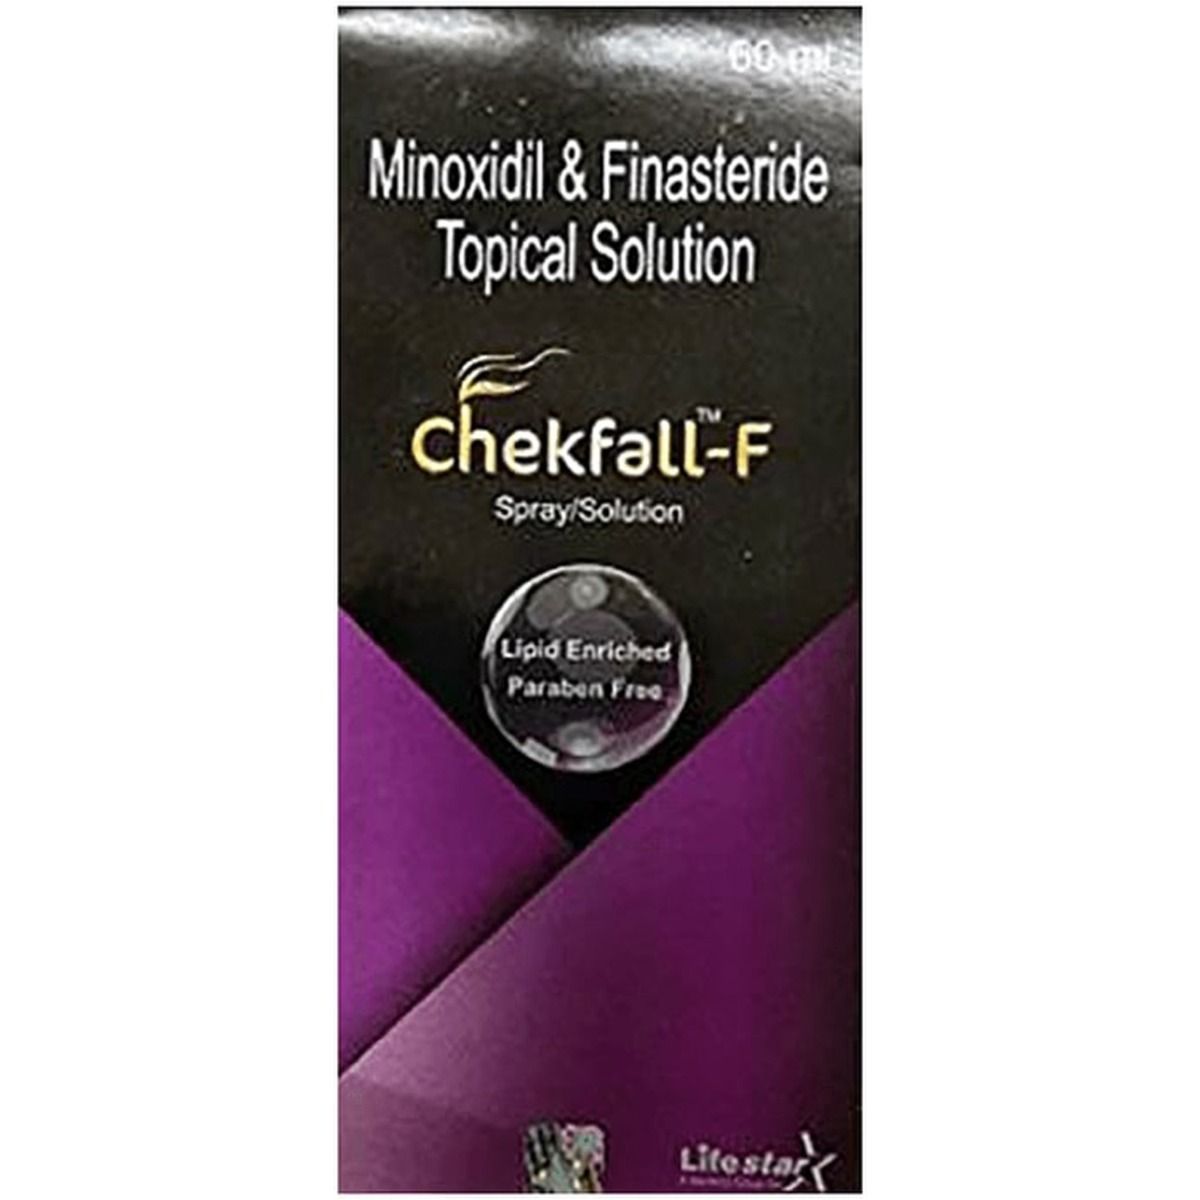 Buy Chekfall Topical Solution 60ml from Mankind Pharma Ltd in India